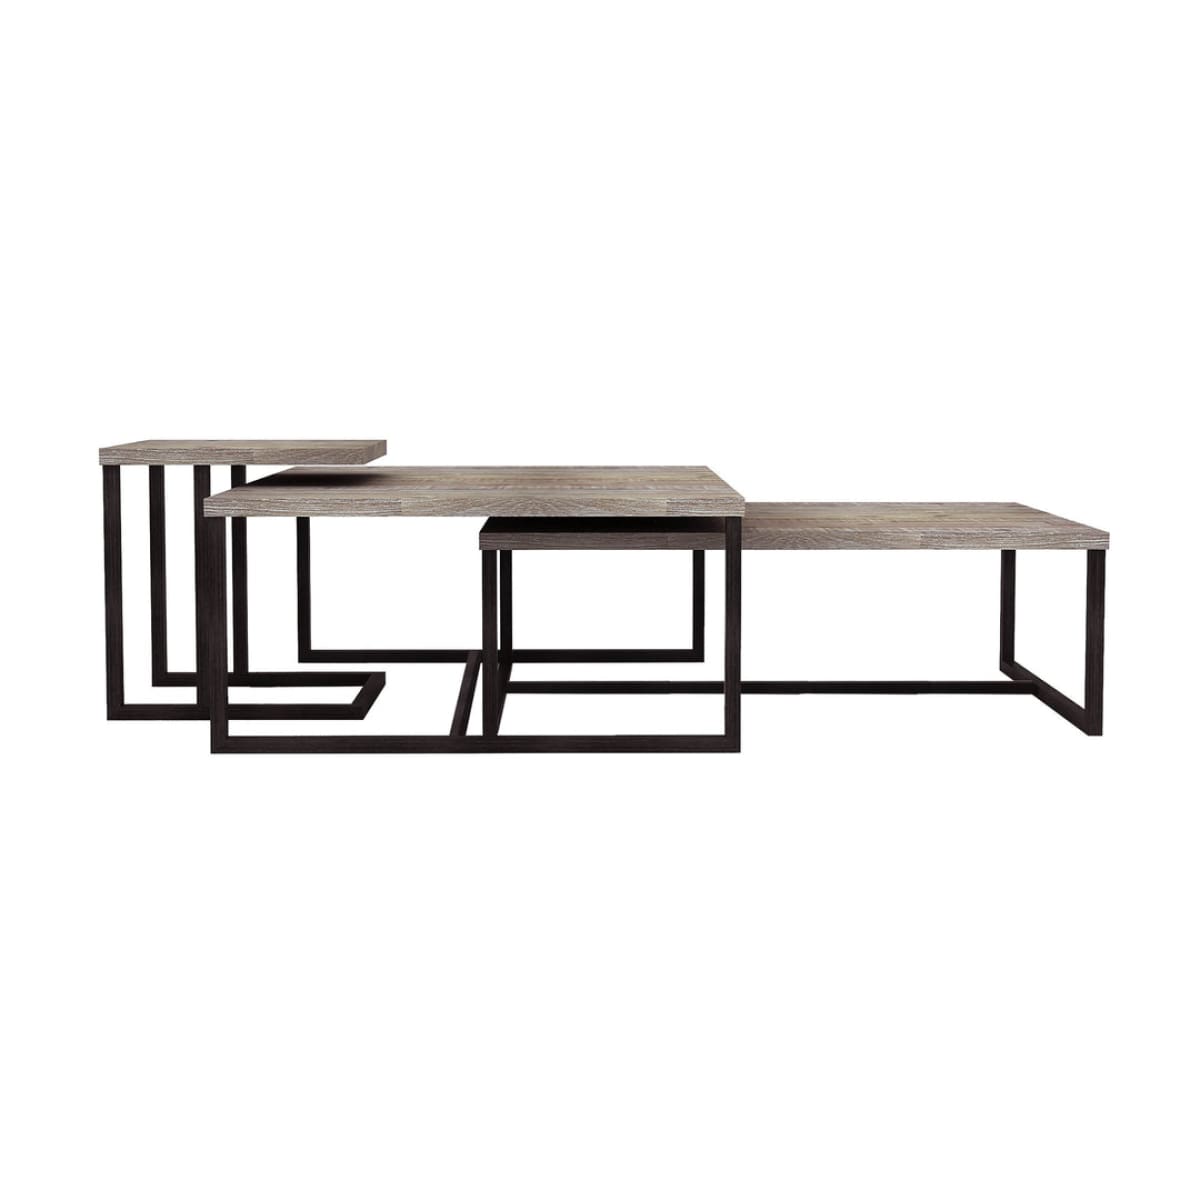 Irondale Rectangular Coffee Table - lh-import-coffee-tables